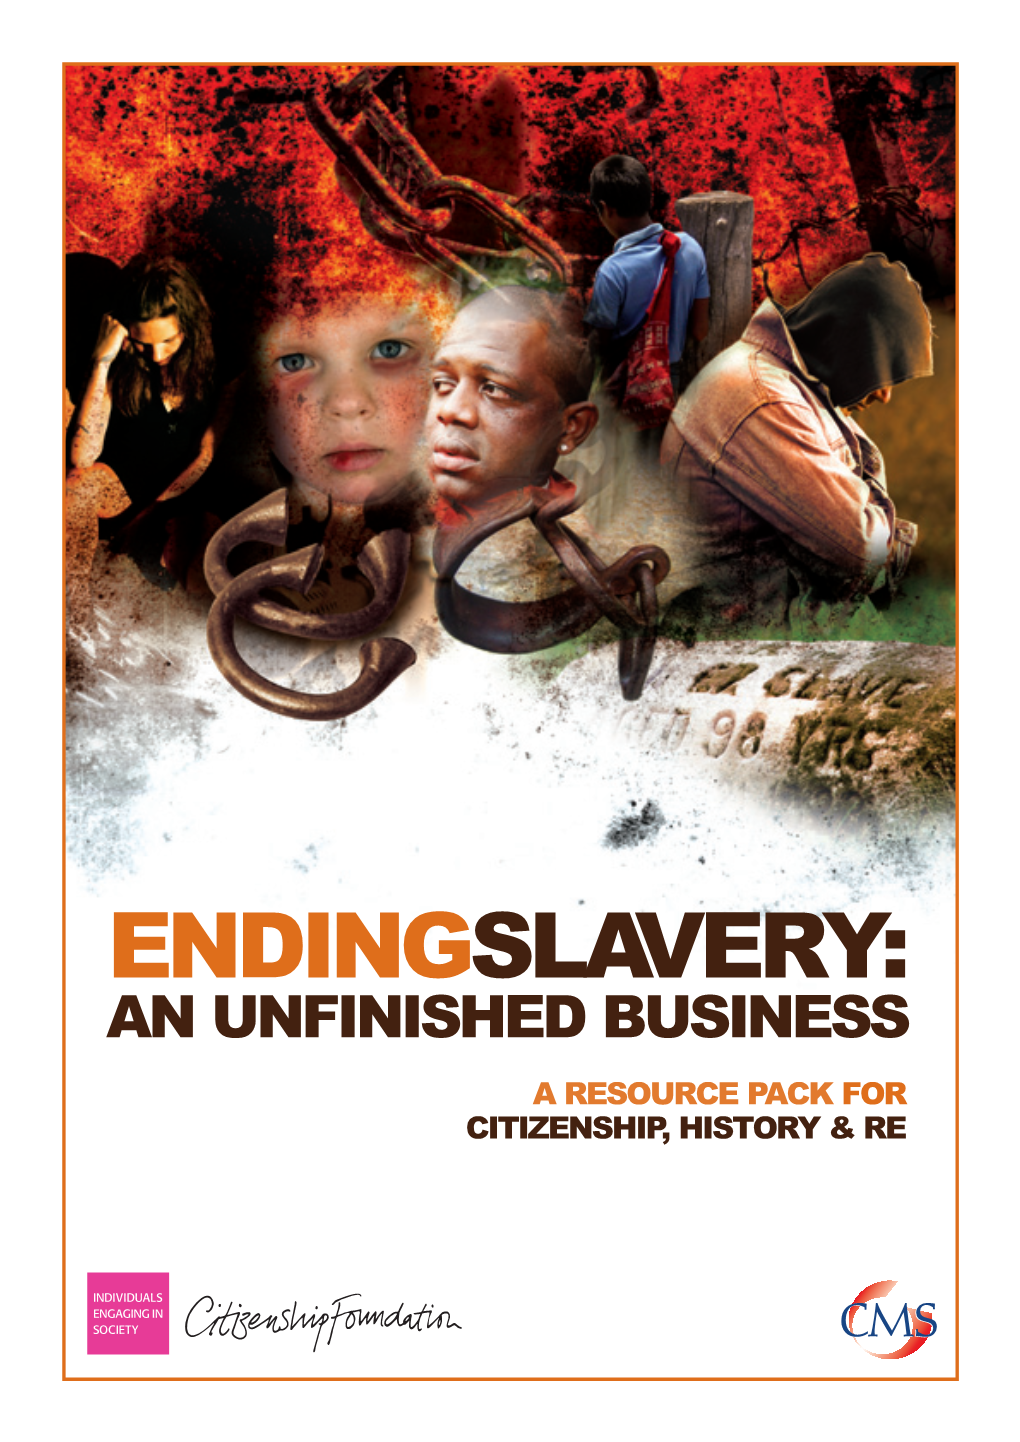 Endingslavery: an Unfinished Business